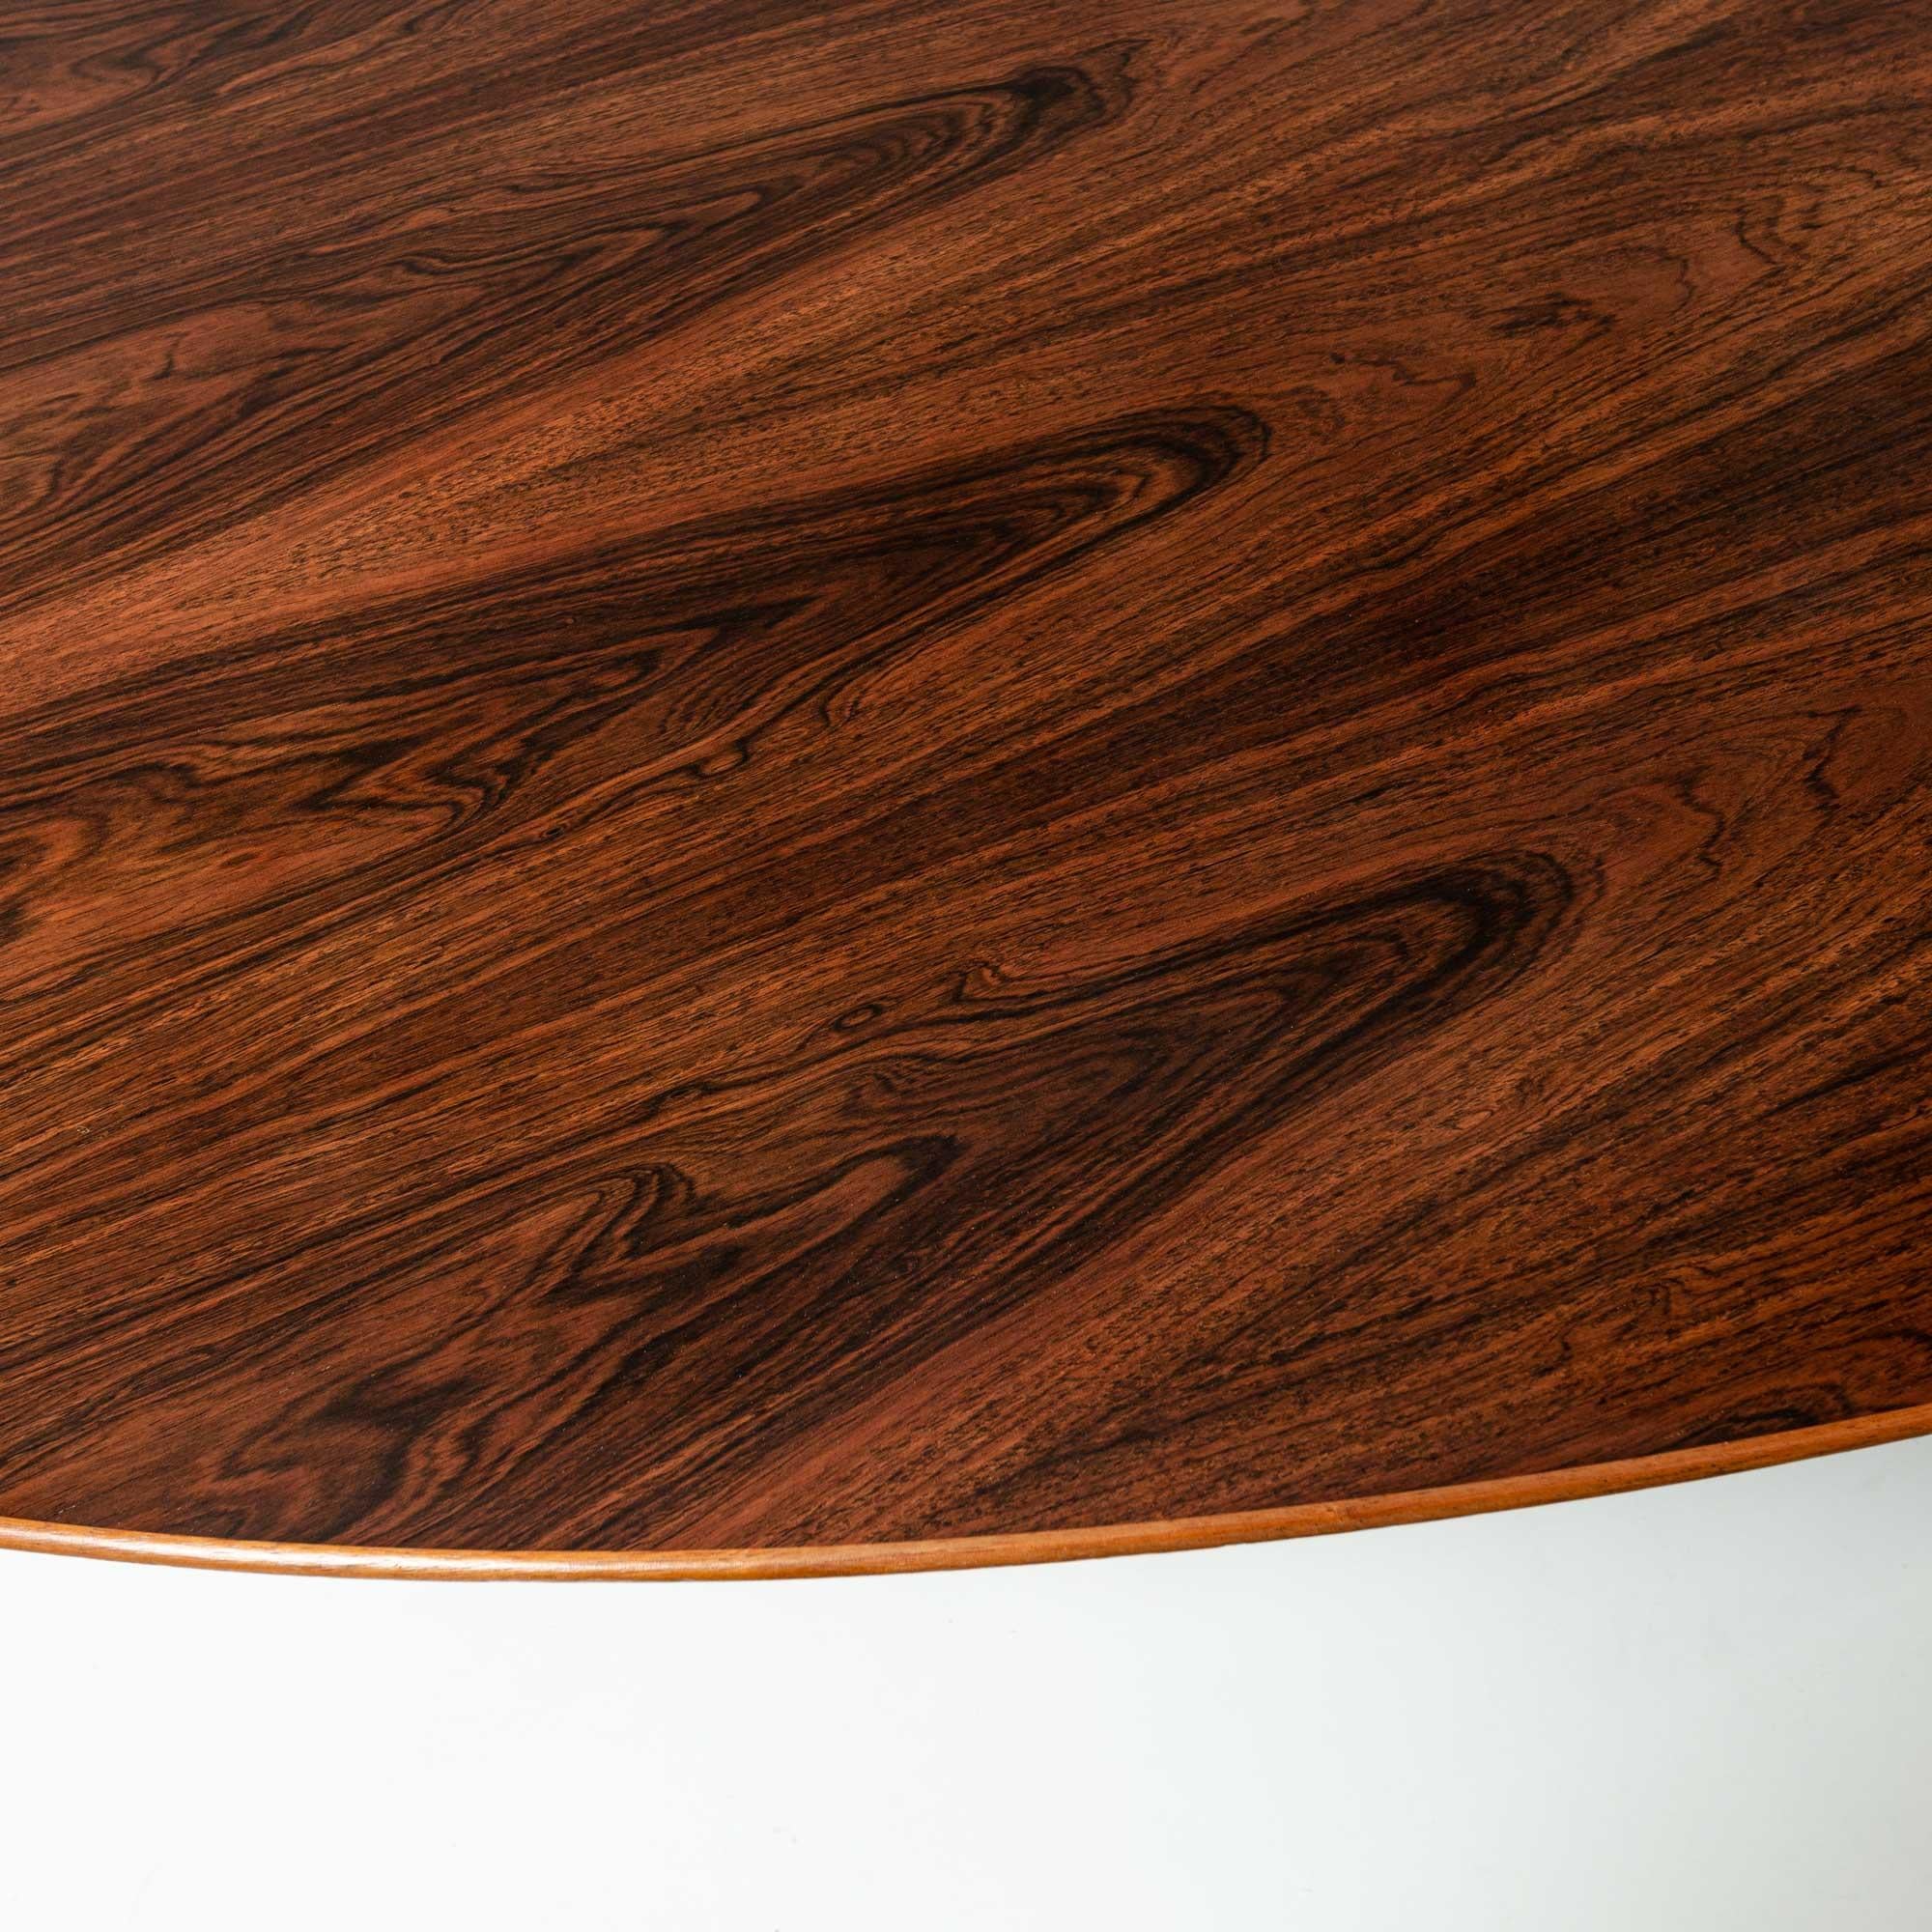 Steel Florence Knoll 1961 Oval Table/Desk in Rosewood